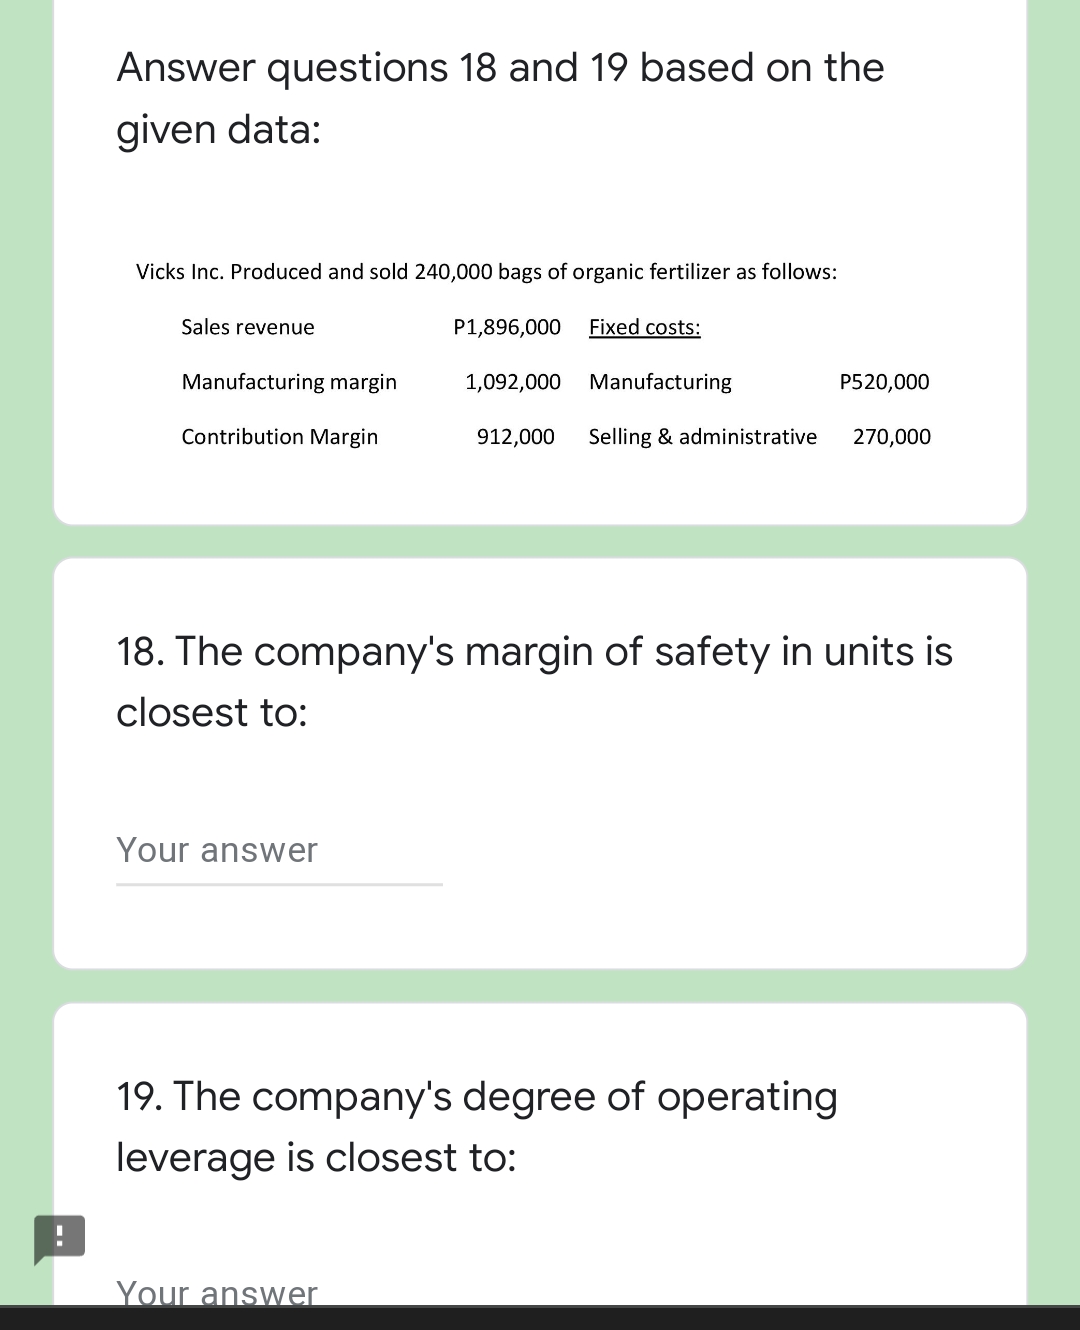 Answer questions 18 and 19 based on the
given data:
Vicks Inc. Produced and sold 240,000 bags of organic fertilizer as follows:
Sales revenue
P1,896,000
Fixed costs:
Manufacturing margin
1,092,000
Manufacturing
P520,000
Contribution Margin
912,000
Selling & administrative
270,000
18. The company's margin of safety in units is
closest to:
Your answer
19. The company's degree of operating
leverage is closest to:
Your answer
